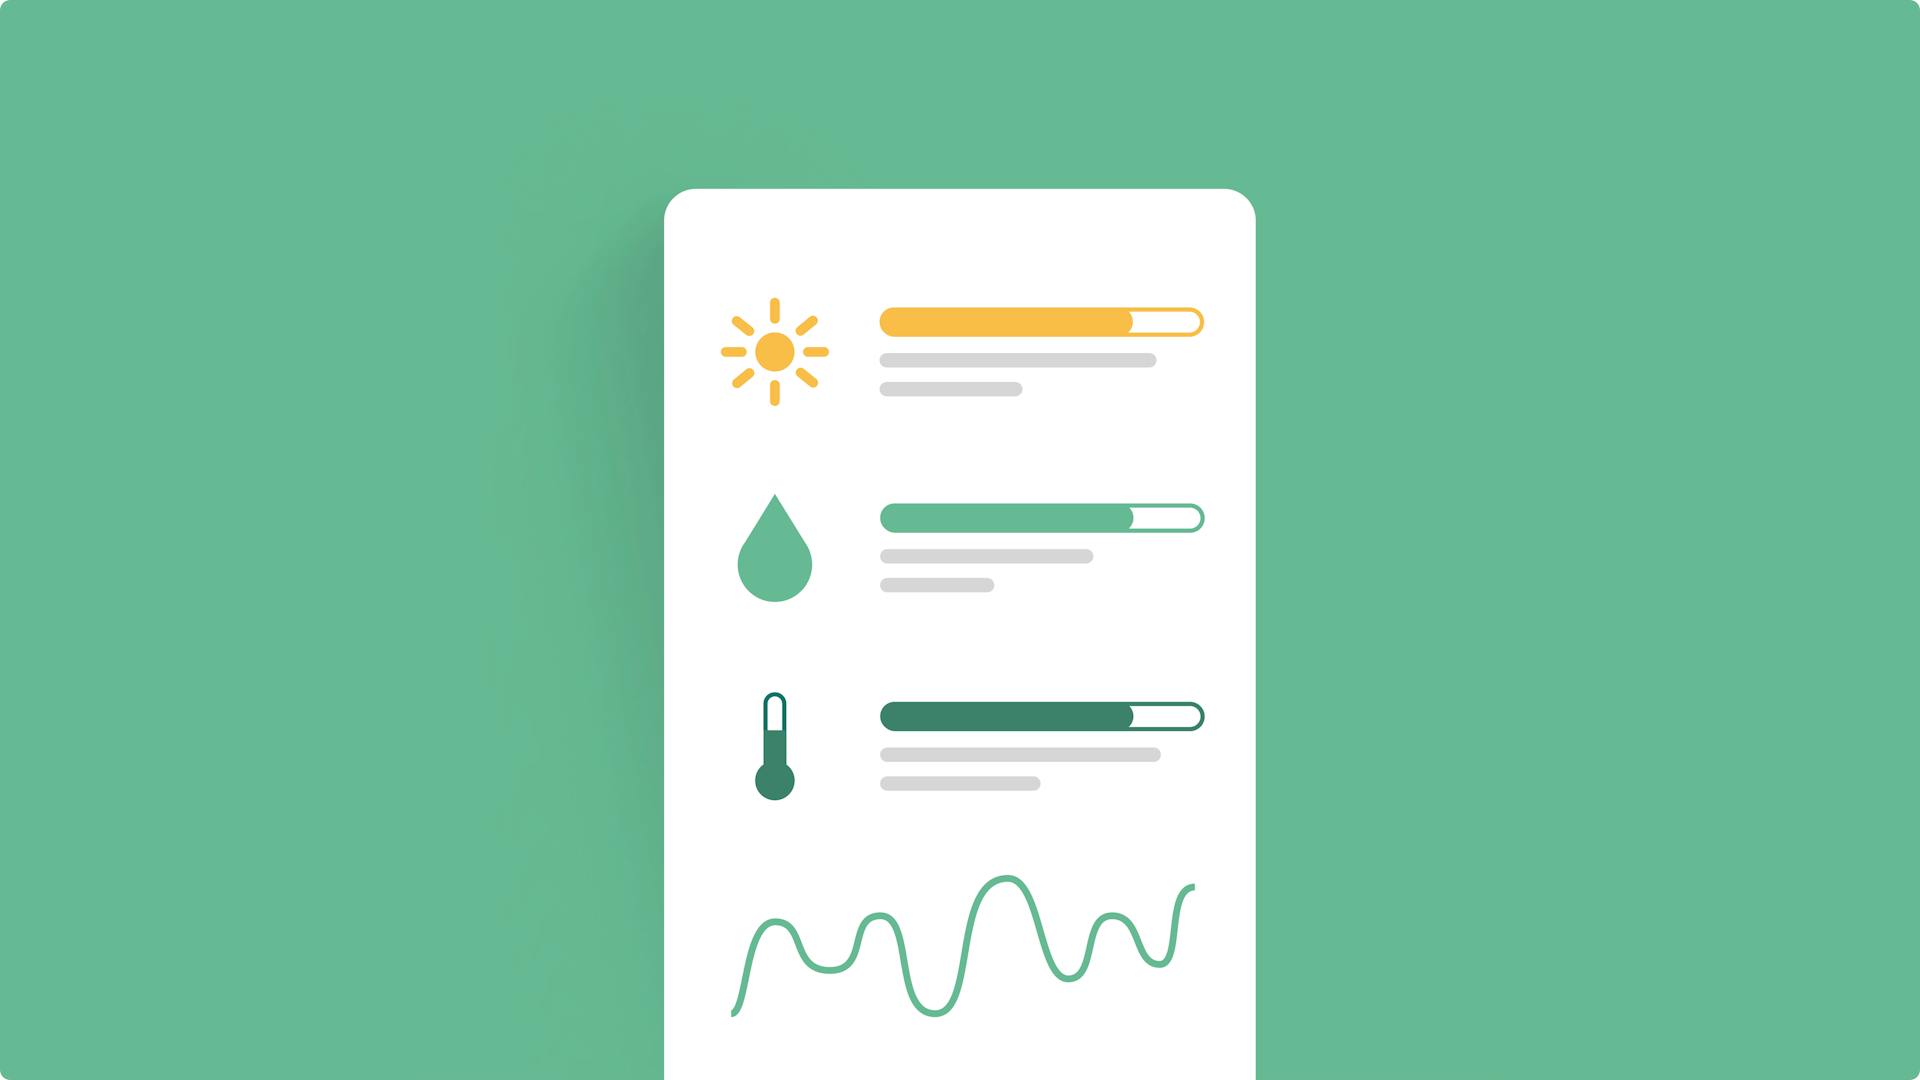 Illustration of a smartphone screen showing stats for sun, rain and temperature with a graph